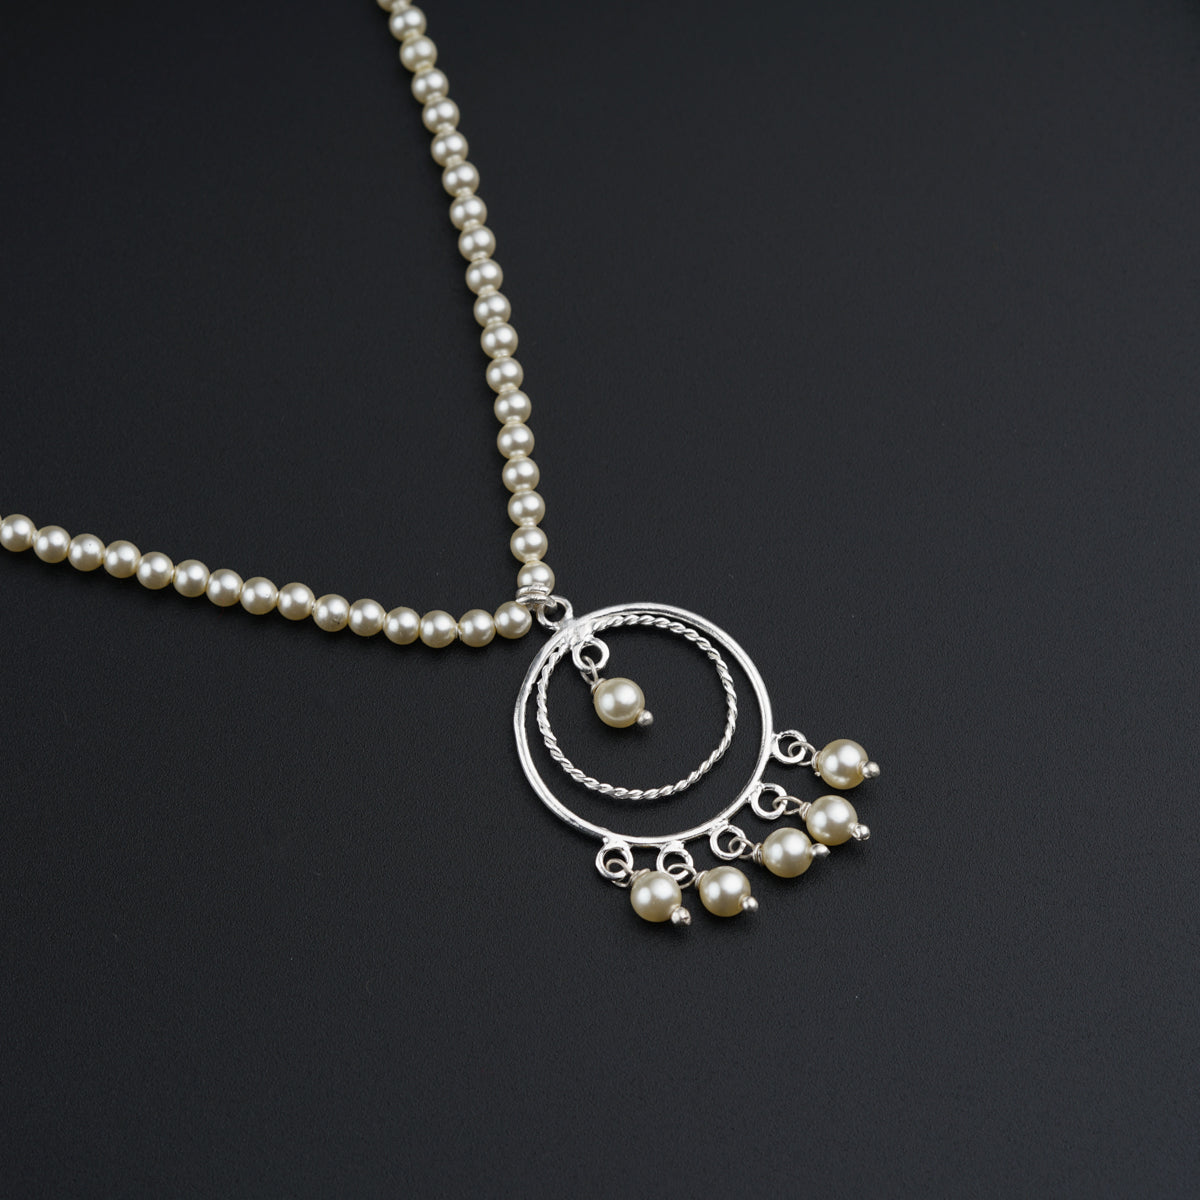 a necklace with pearls hanging from it on a black surface